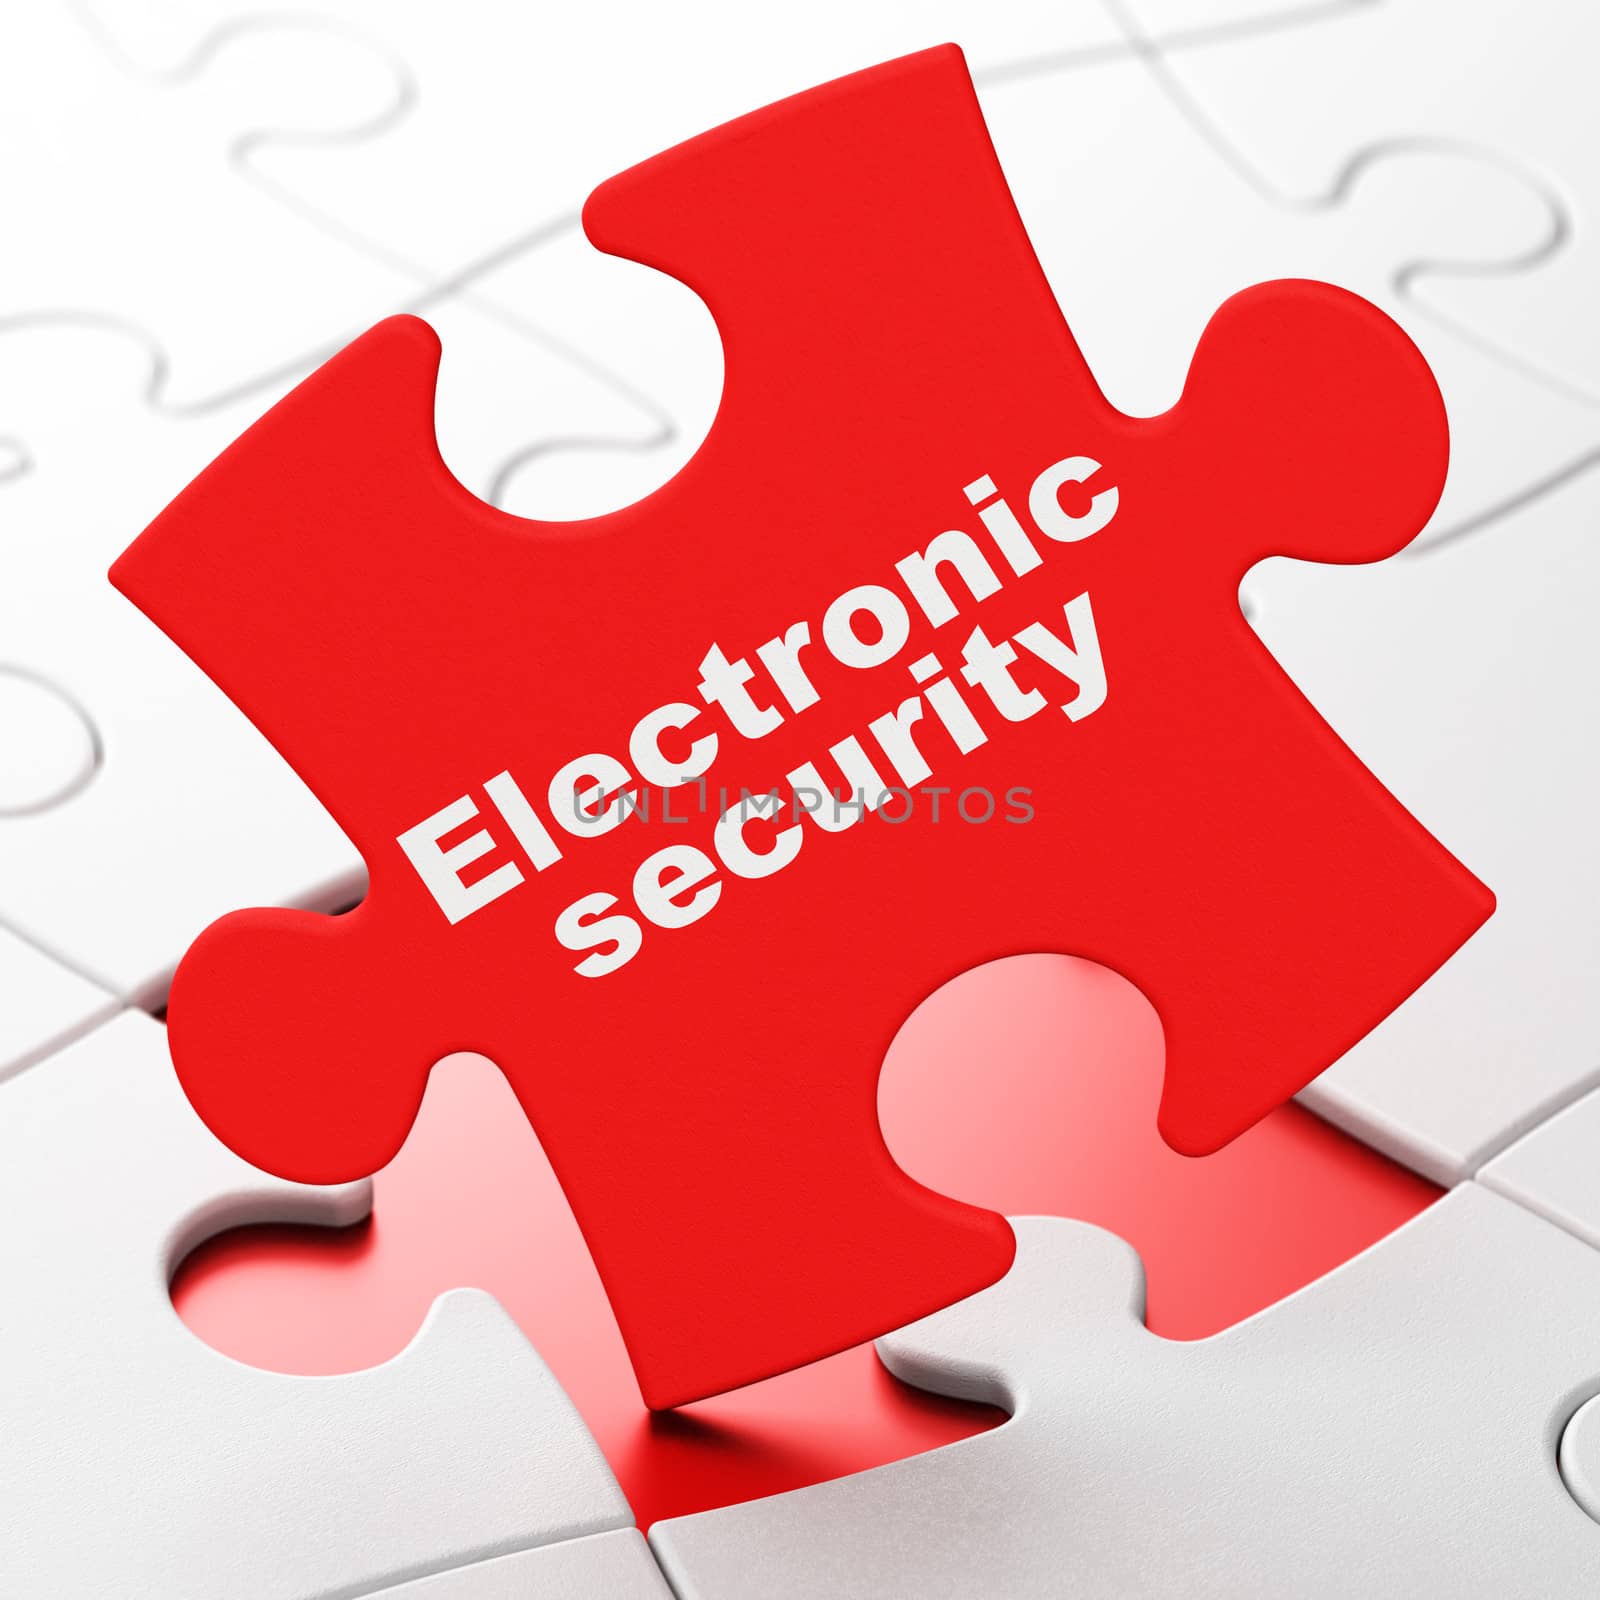 Safety concept: Electronic Security on Red puzzle pieces background, 3d render